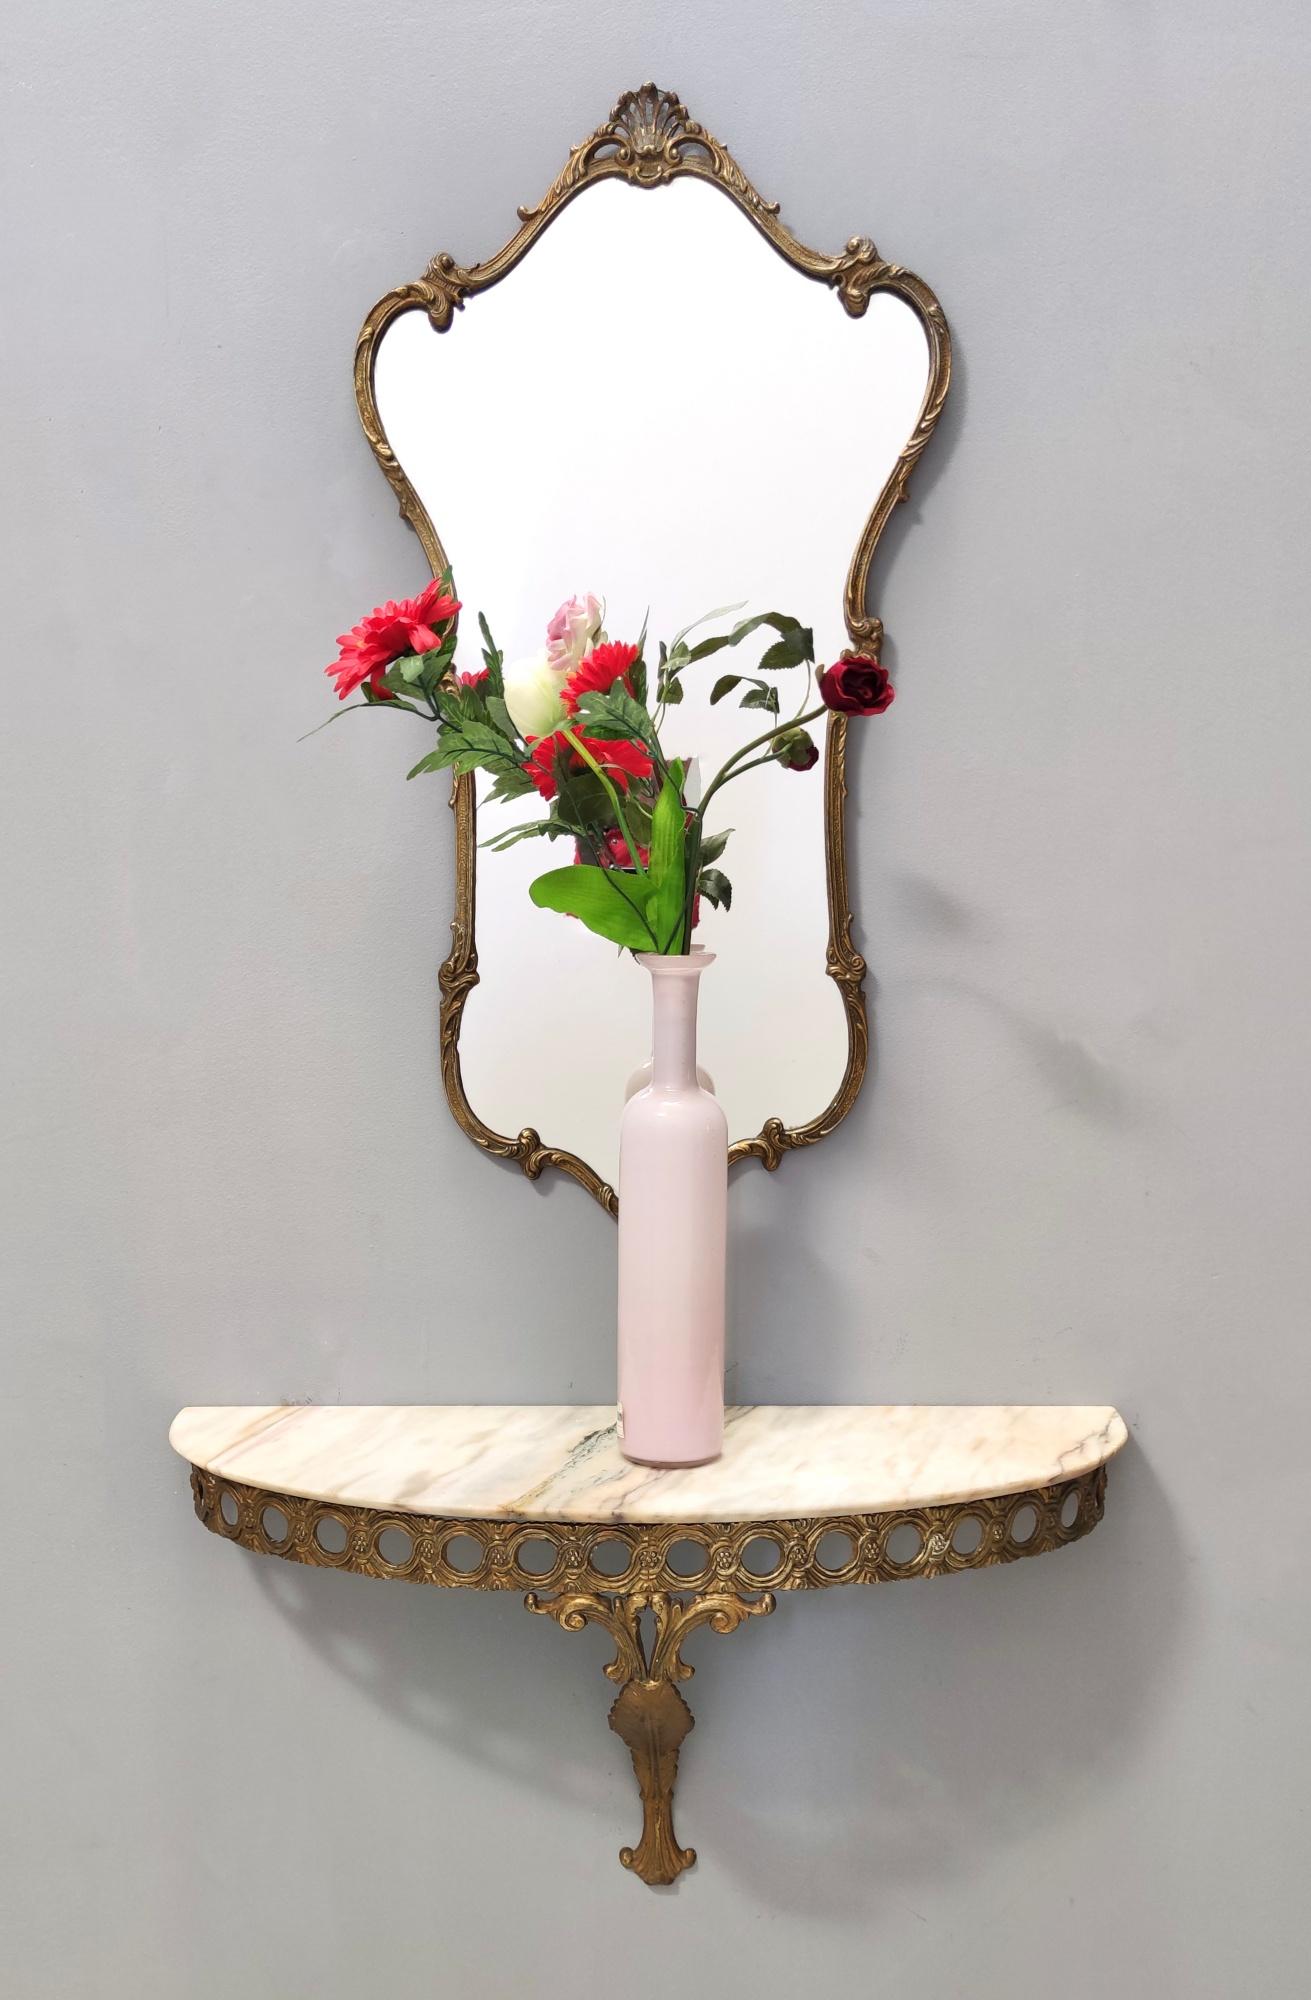 Italy, 1950s.
The wall-mounted console table features a demilune Portuguese pink marble top and both the mirror and the console have a varnished brass and metal frame.
They might show slight traces of use since they are vintage, but they can be